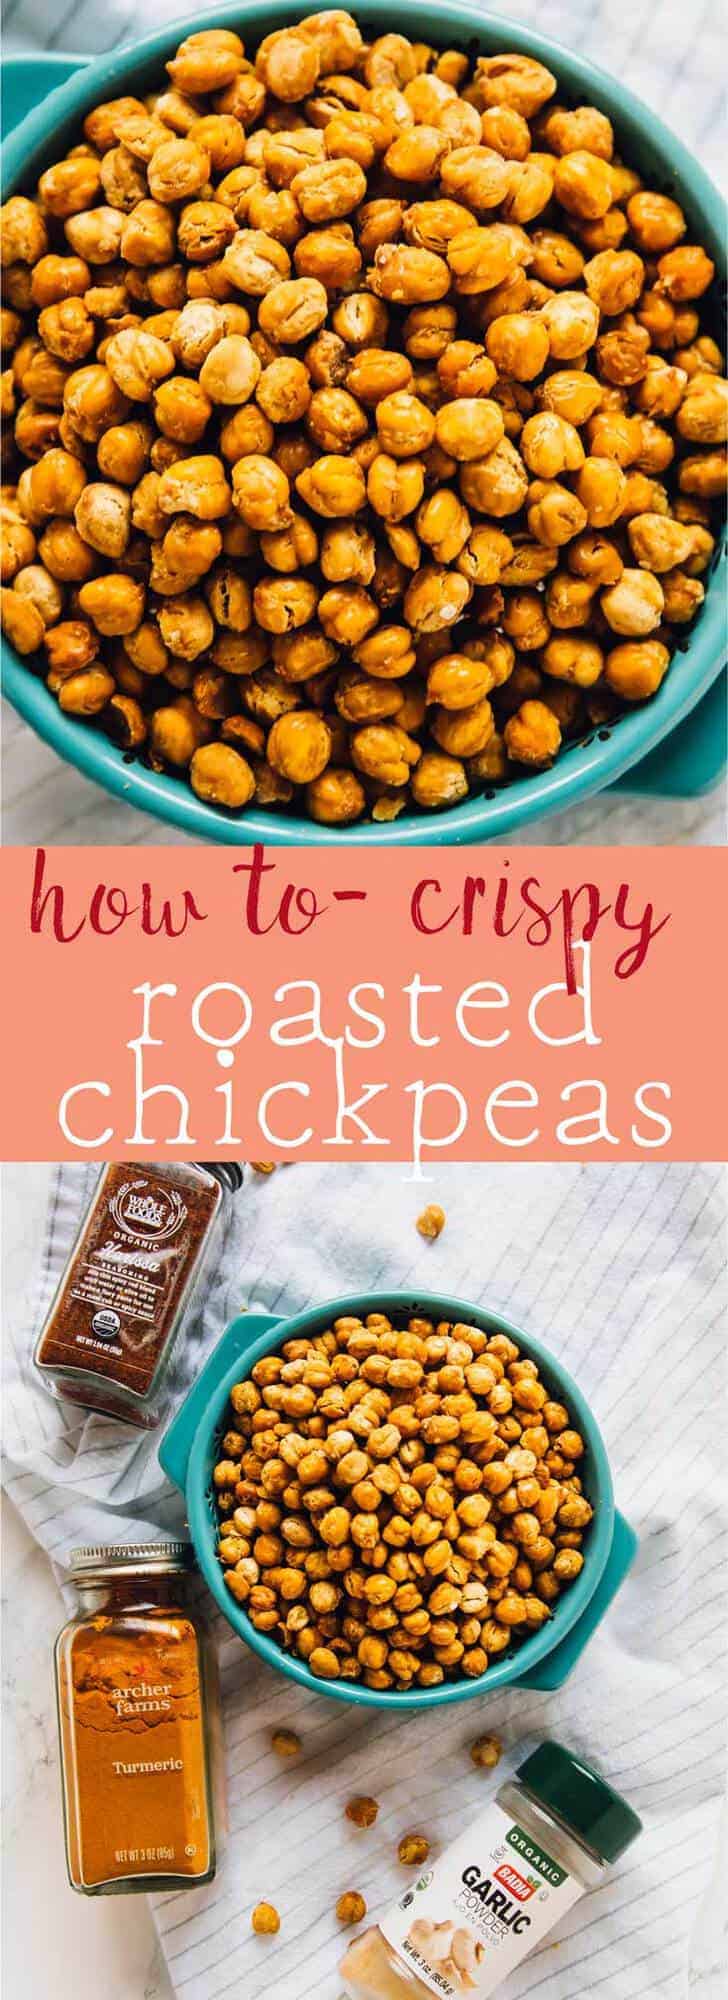 Learn how to make absolutely delicious crispy roasted chickpeas! They're the perfect high protein, addictive snack and so easy to add tons of seasonings and herbs to them! via https://jessicainthekitchen.com